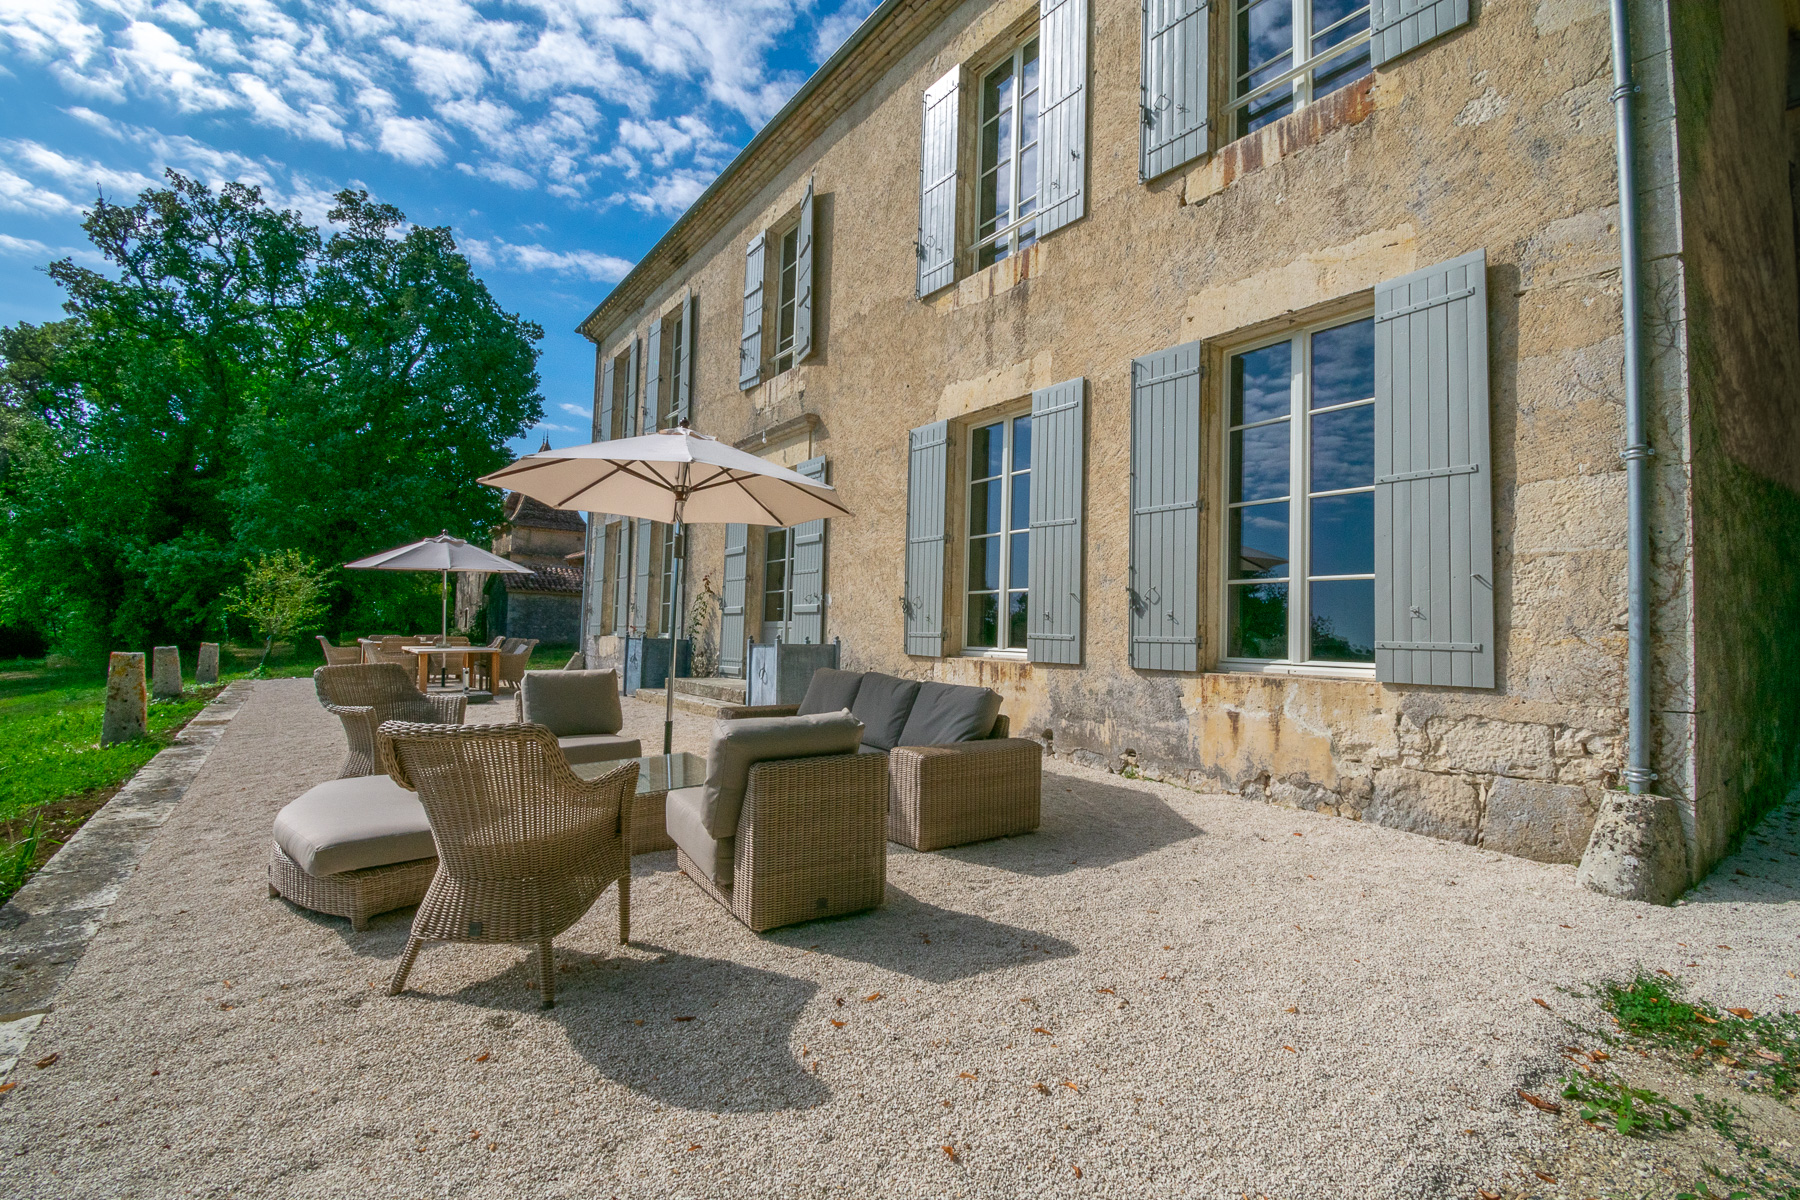 Property photographed by Colin Usher in South West France